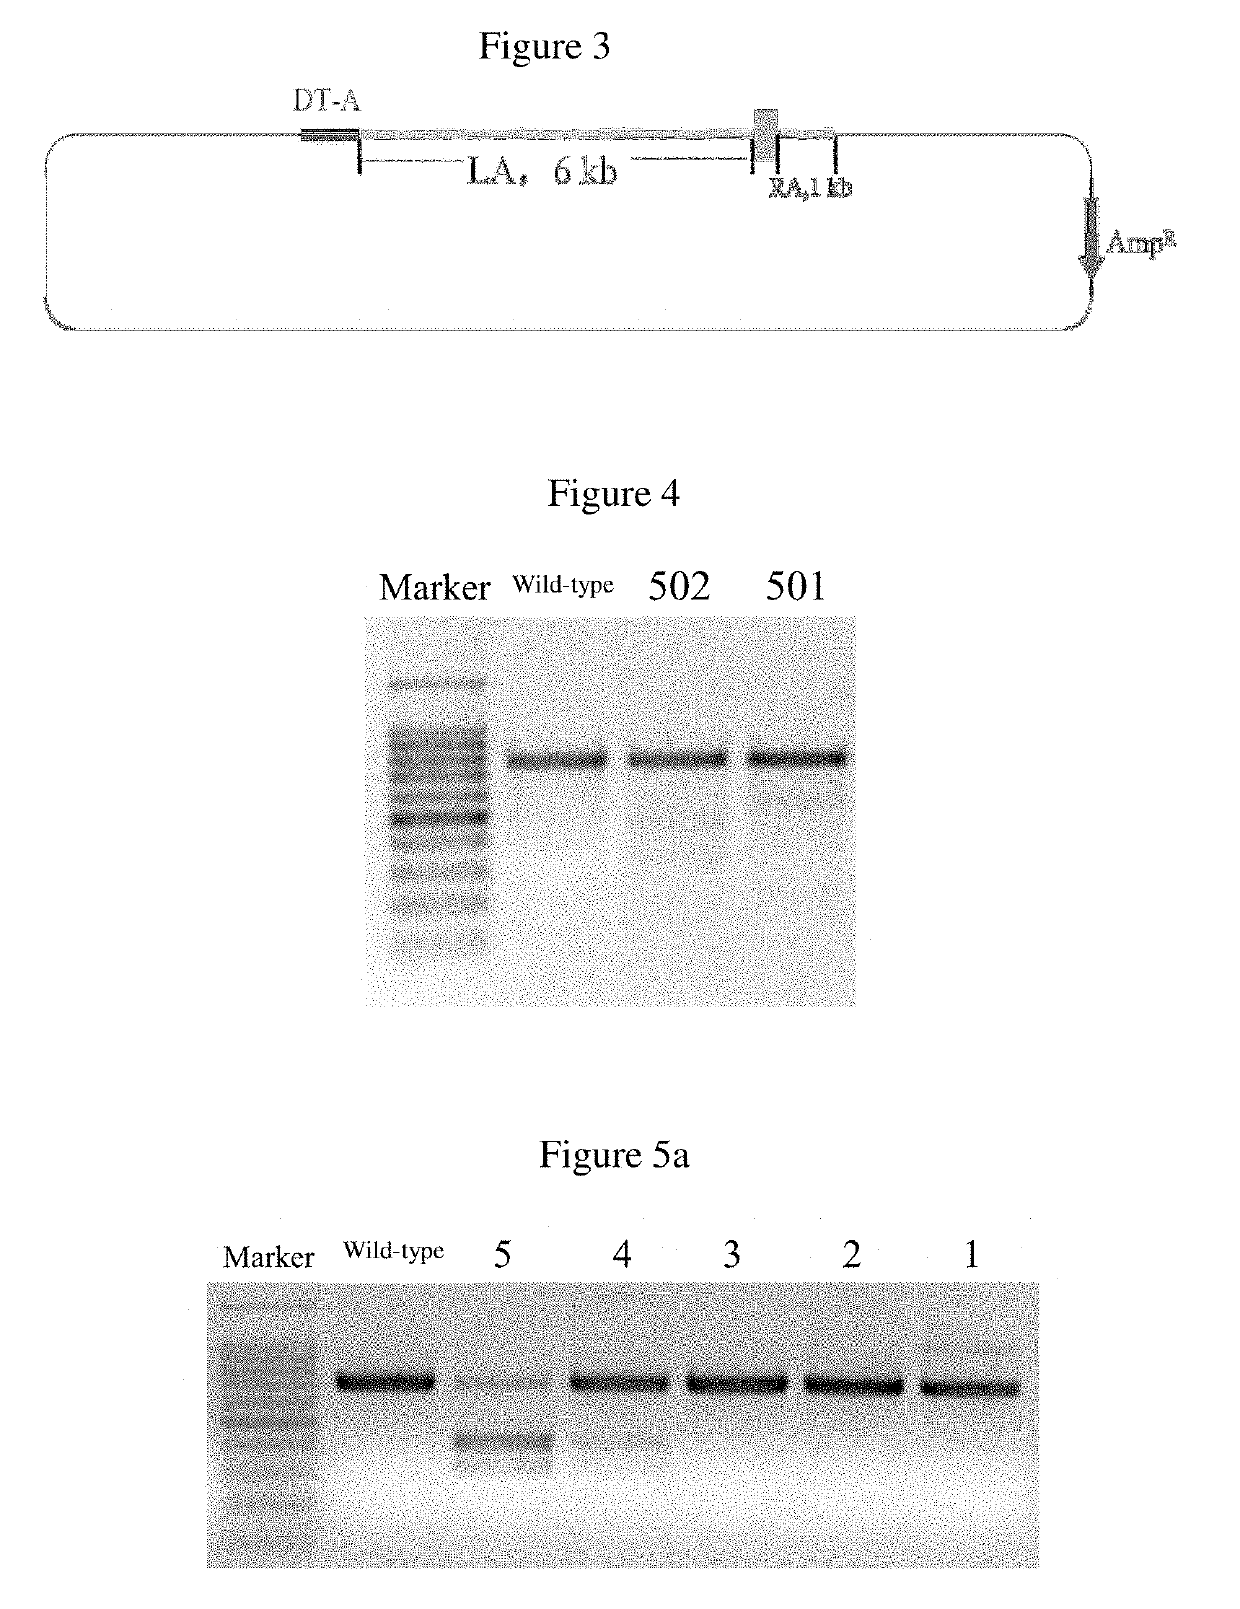 Preparation method for Anti-porcine reproductive and respiratory syndrome cloned pig